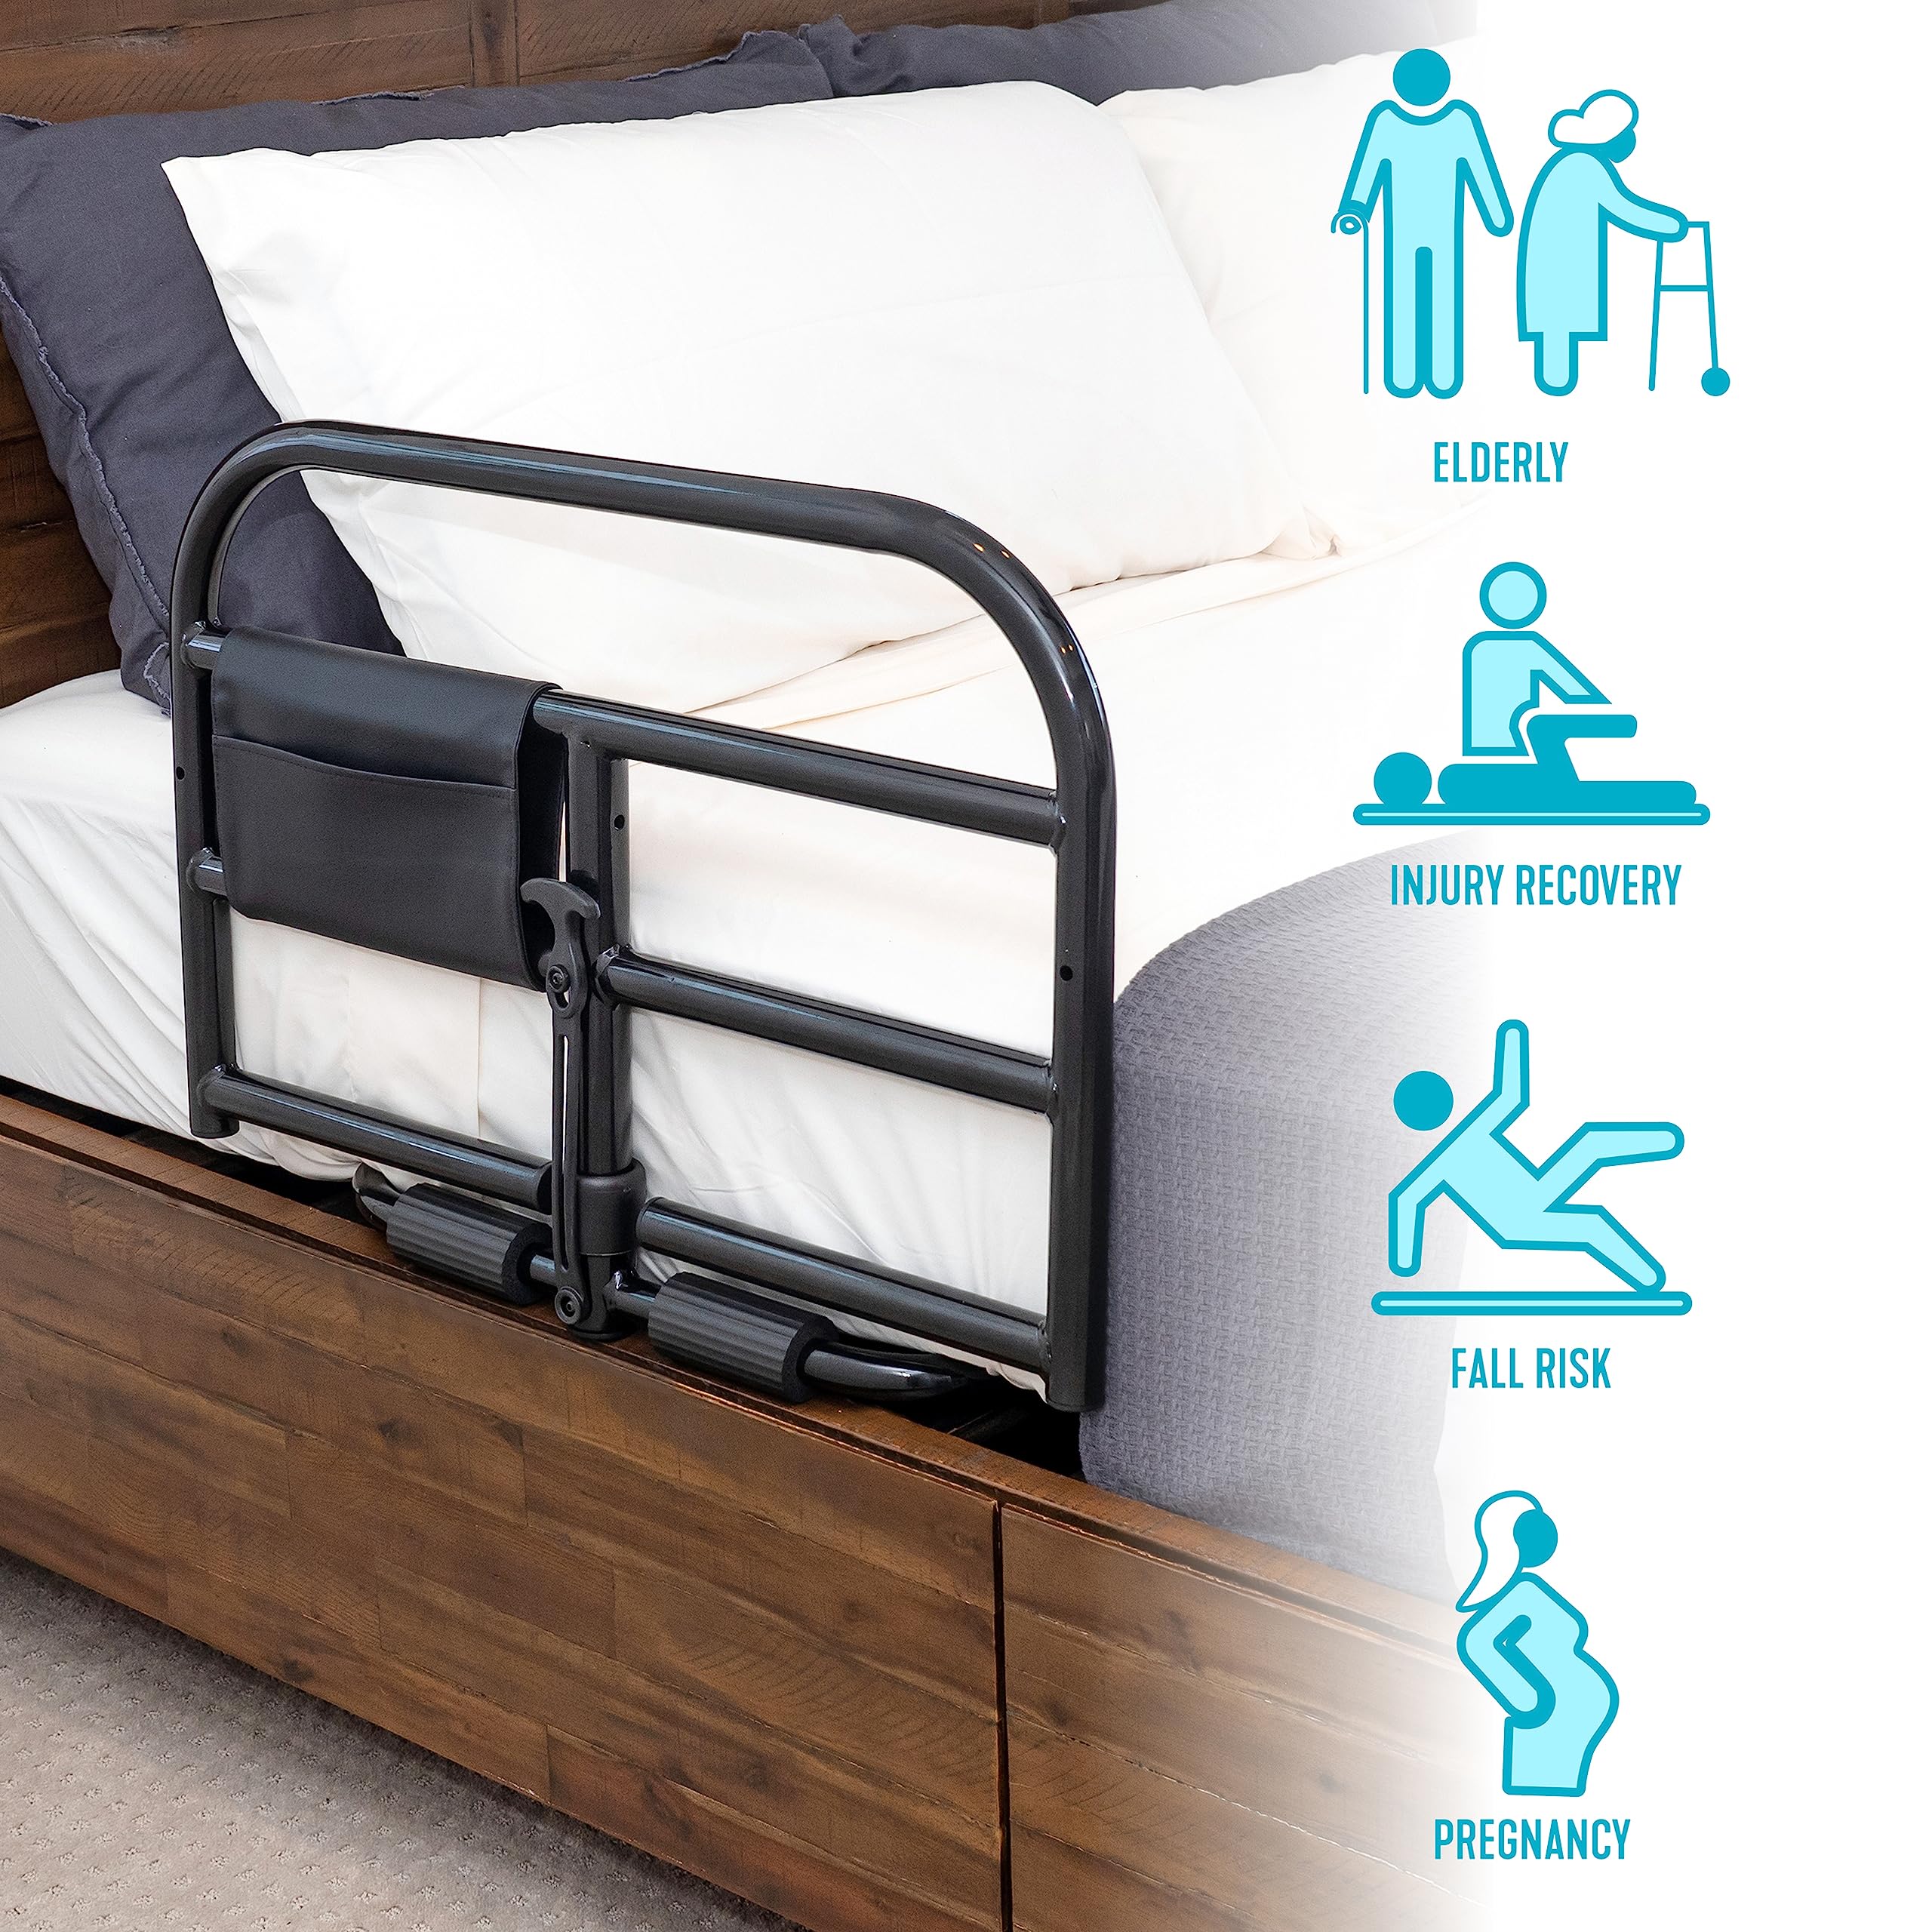 Stander Prime Safety Bed Rail, Bariatric Bed Bar Handle for Bed for Adults, Seniors, and Elderly, Under Mattress Bedside Rail, Fall Guard and Stand Assist, Fits Most King, Queen, Full, and Twin Beds